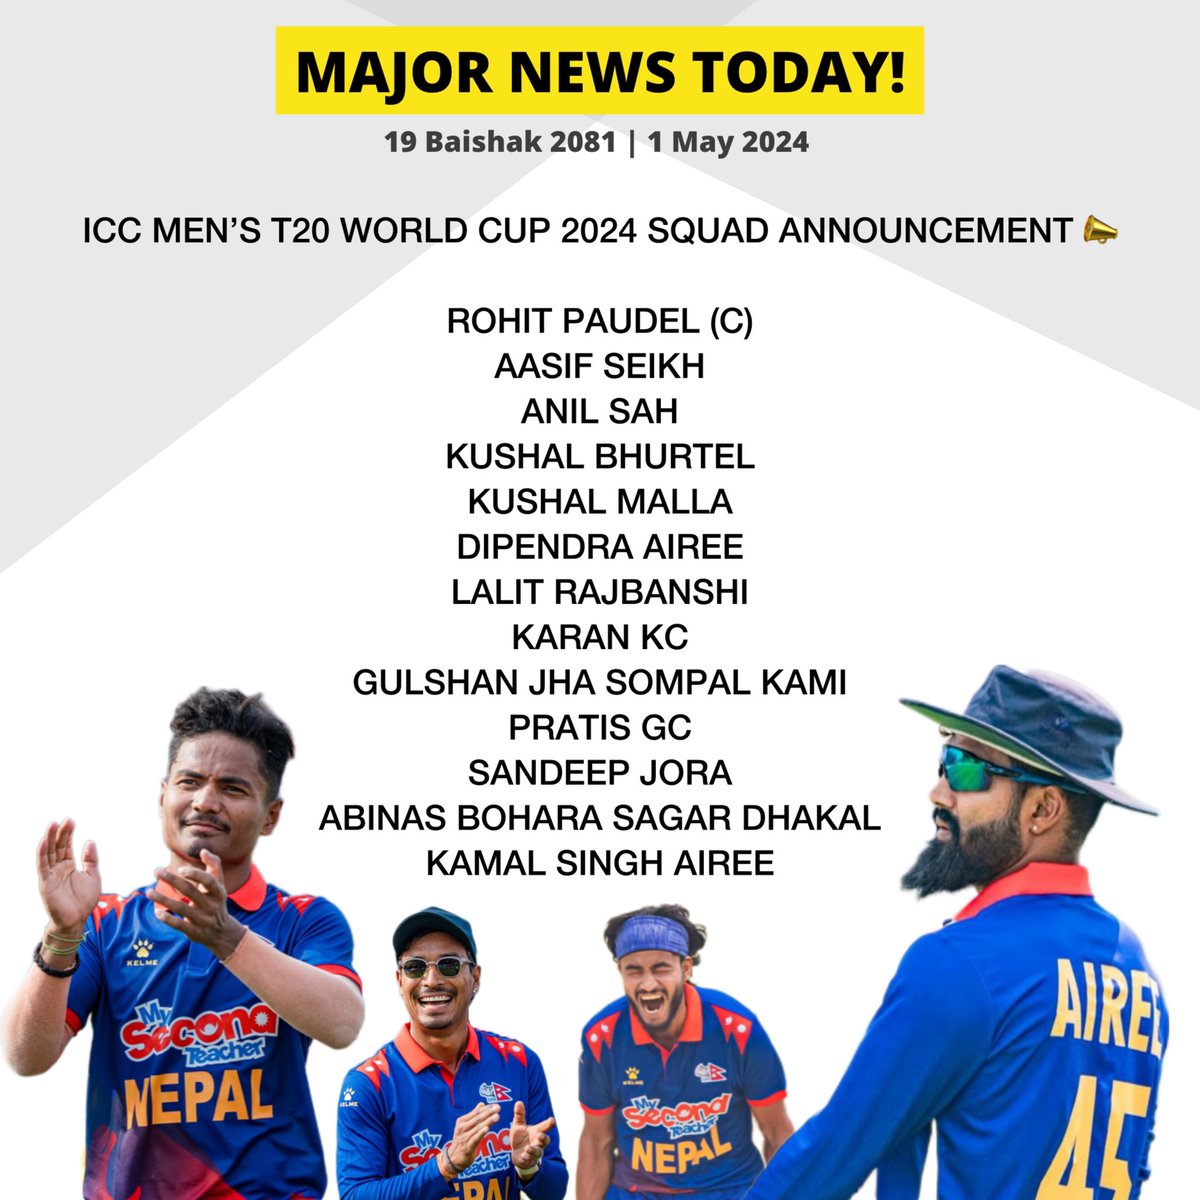 आजको प्रमुख समाचार | MAJOR NEWS TODAY 

What do you think about this squad?
#AajaKoPramukhSamachar #triggerwarning #nonextquestion